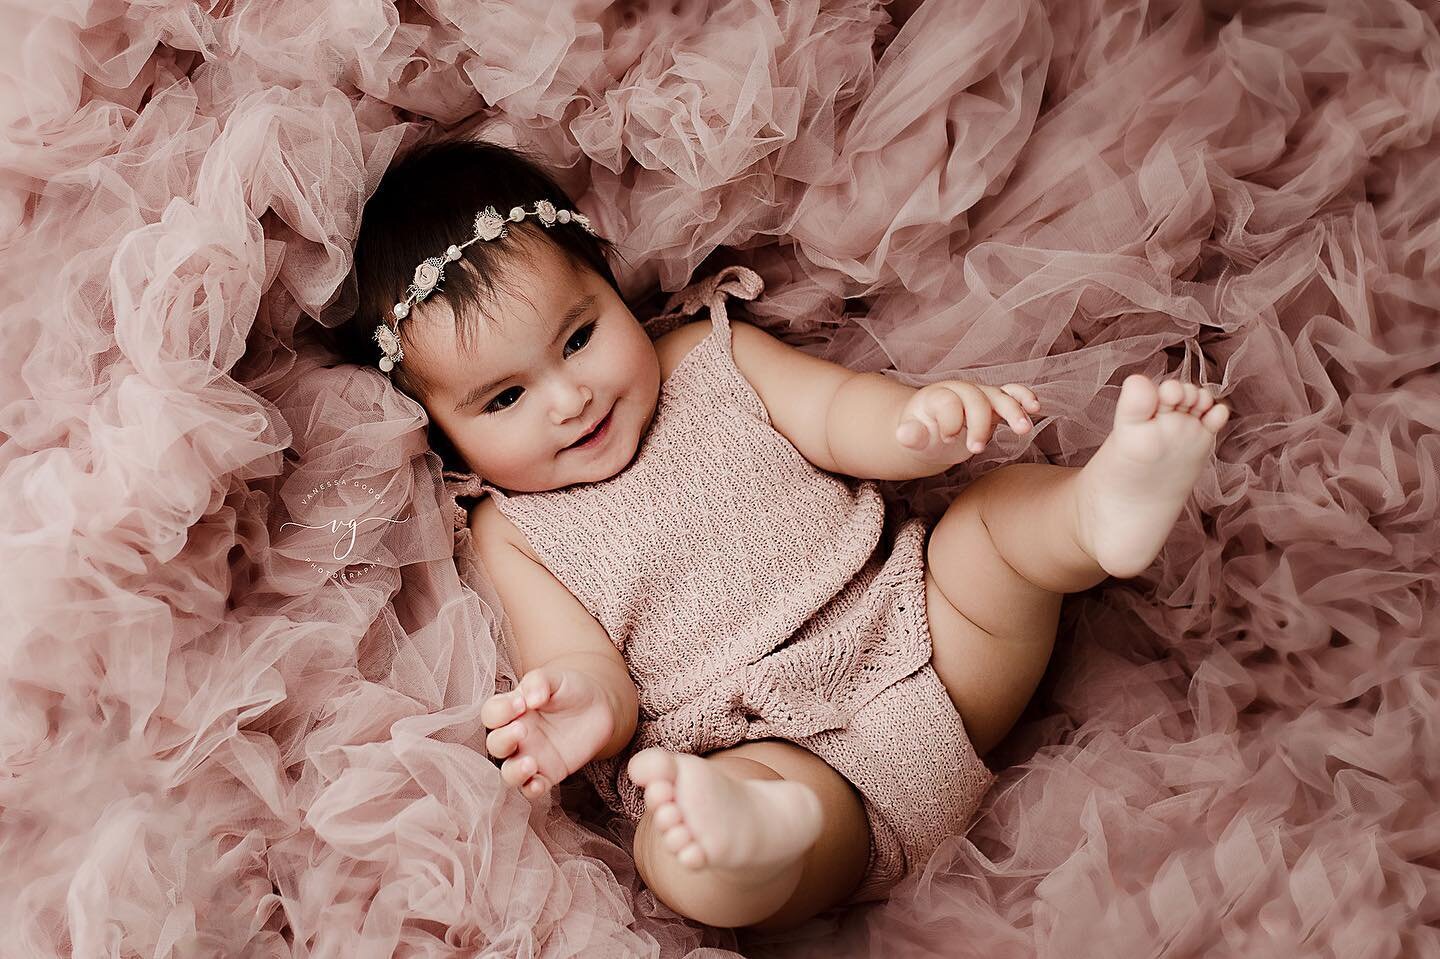 Andrea | 9 sweet months🌷

www.vgphotography.org

#milestones #baby #babyphotography #babysfirstyear #quadcitiesphotographer #molinephotographer #davenportphotographer #bettendorfphotographer #photography #quadcitiesphotography